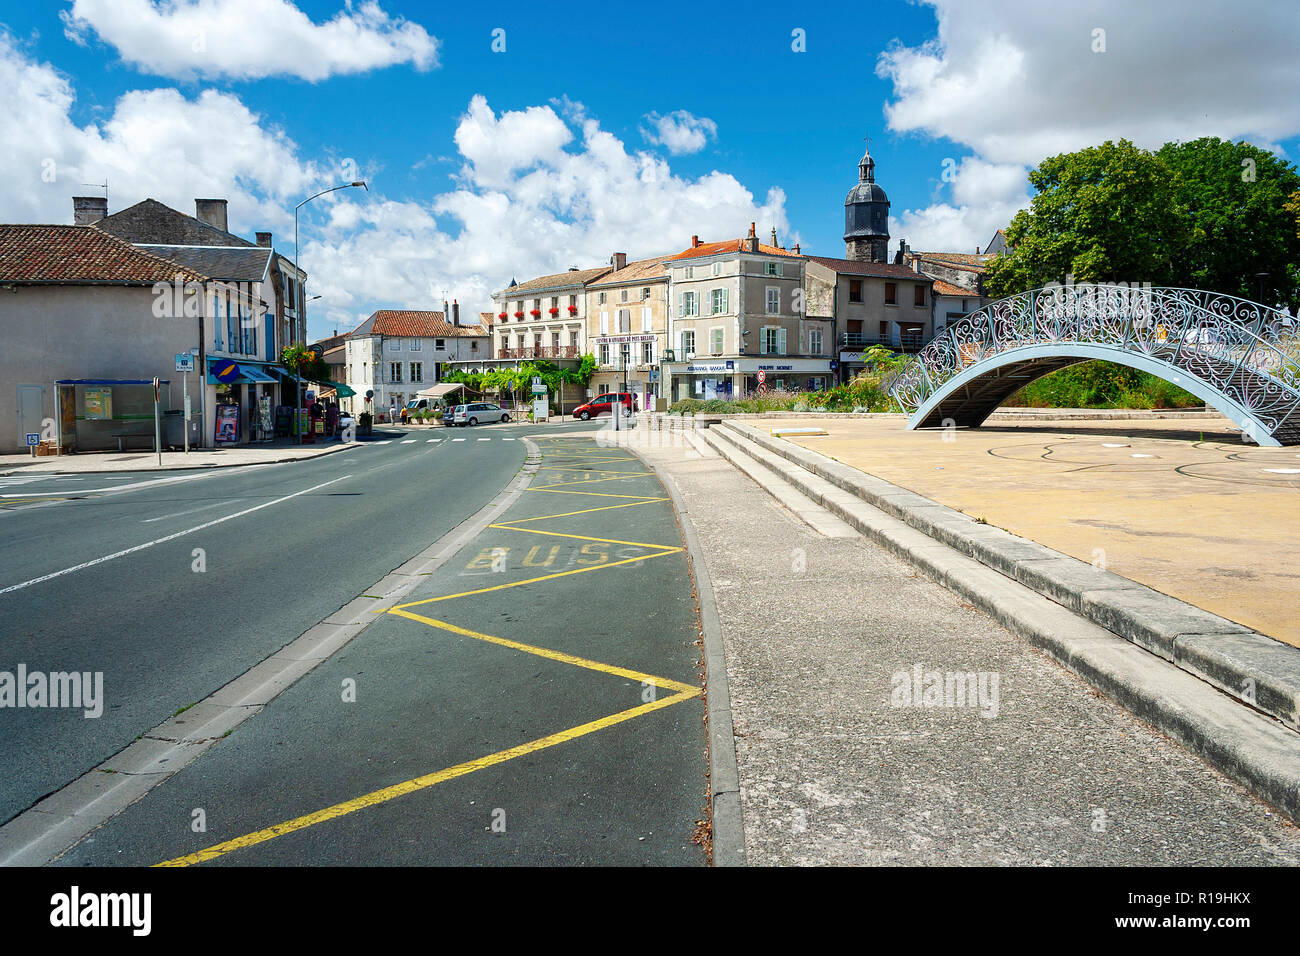 Melle, Deux-Sevres, France - July 6, 2011: Road through Melle in France with decorative bridge on a warm summer day Stock Photo